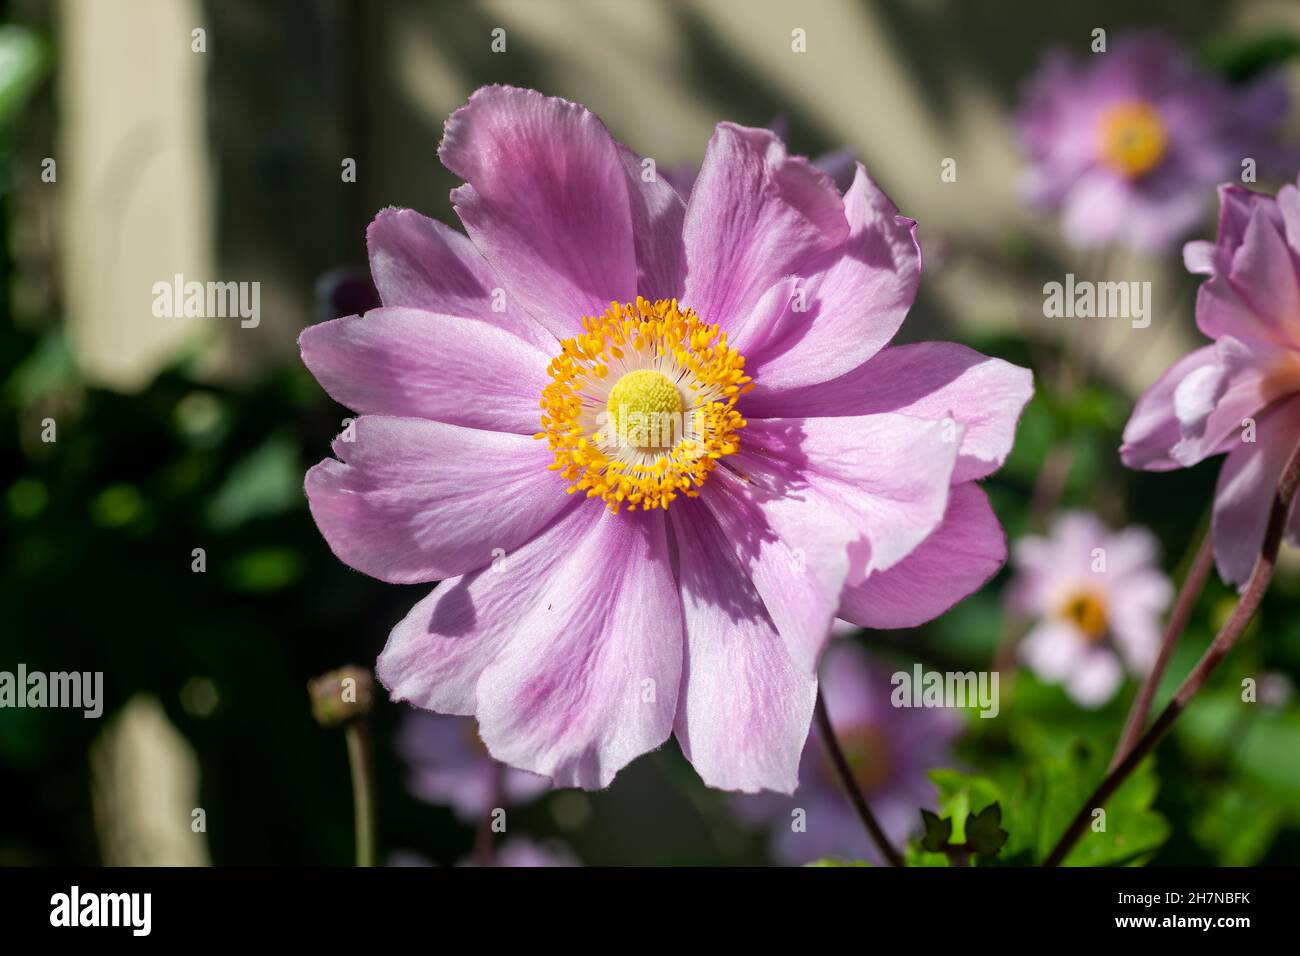 Anemone x Hybrida 'Margarete' a summer autumn fall flowering plant with a pink summertime flower commonly known as Japanese anemone, stock photo image Stock Photo